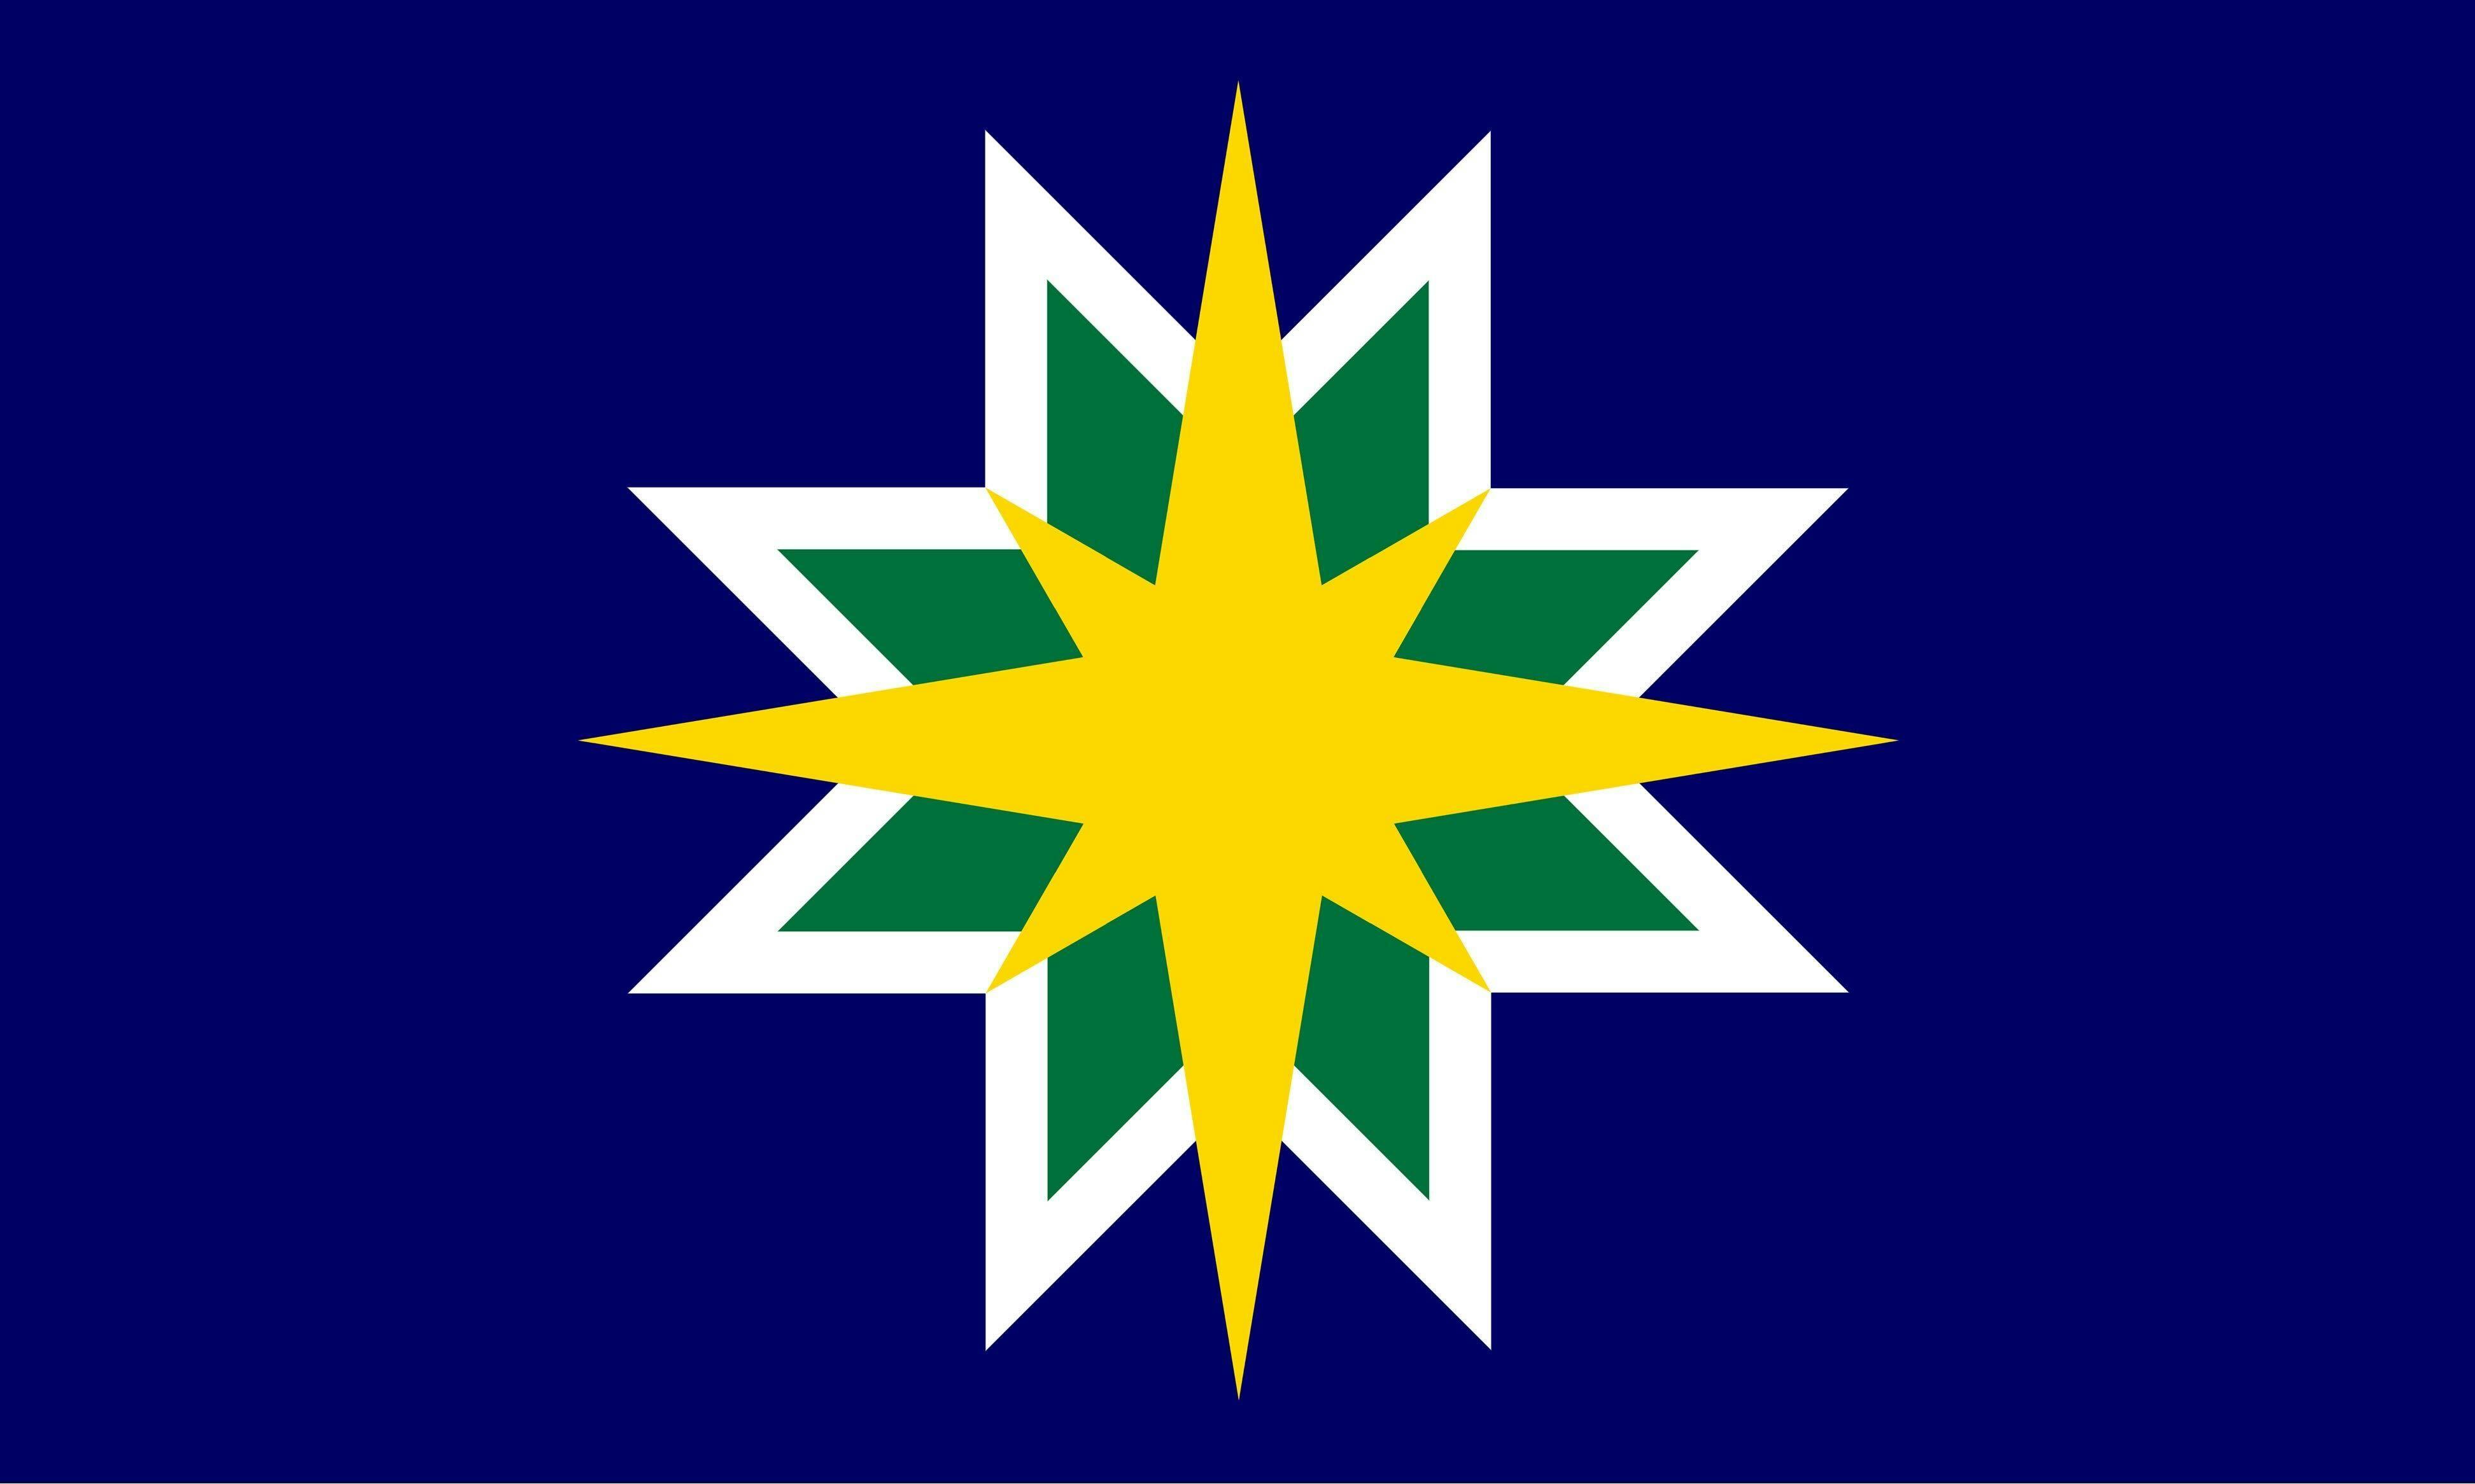 The North Star Flag: A Proposal for a New Minnesota State Flag